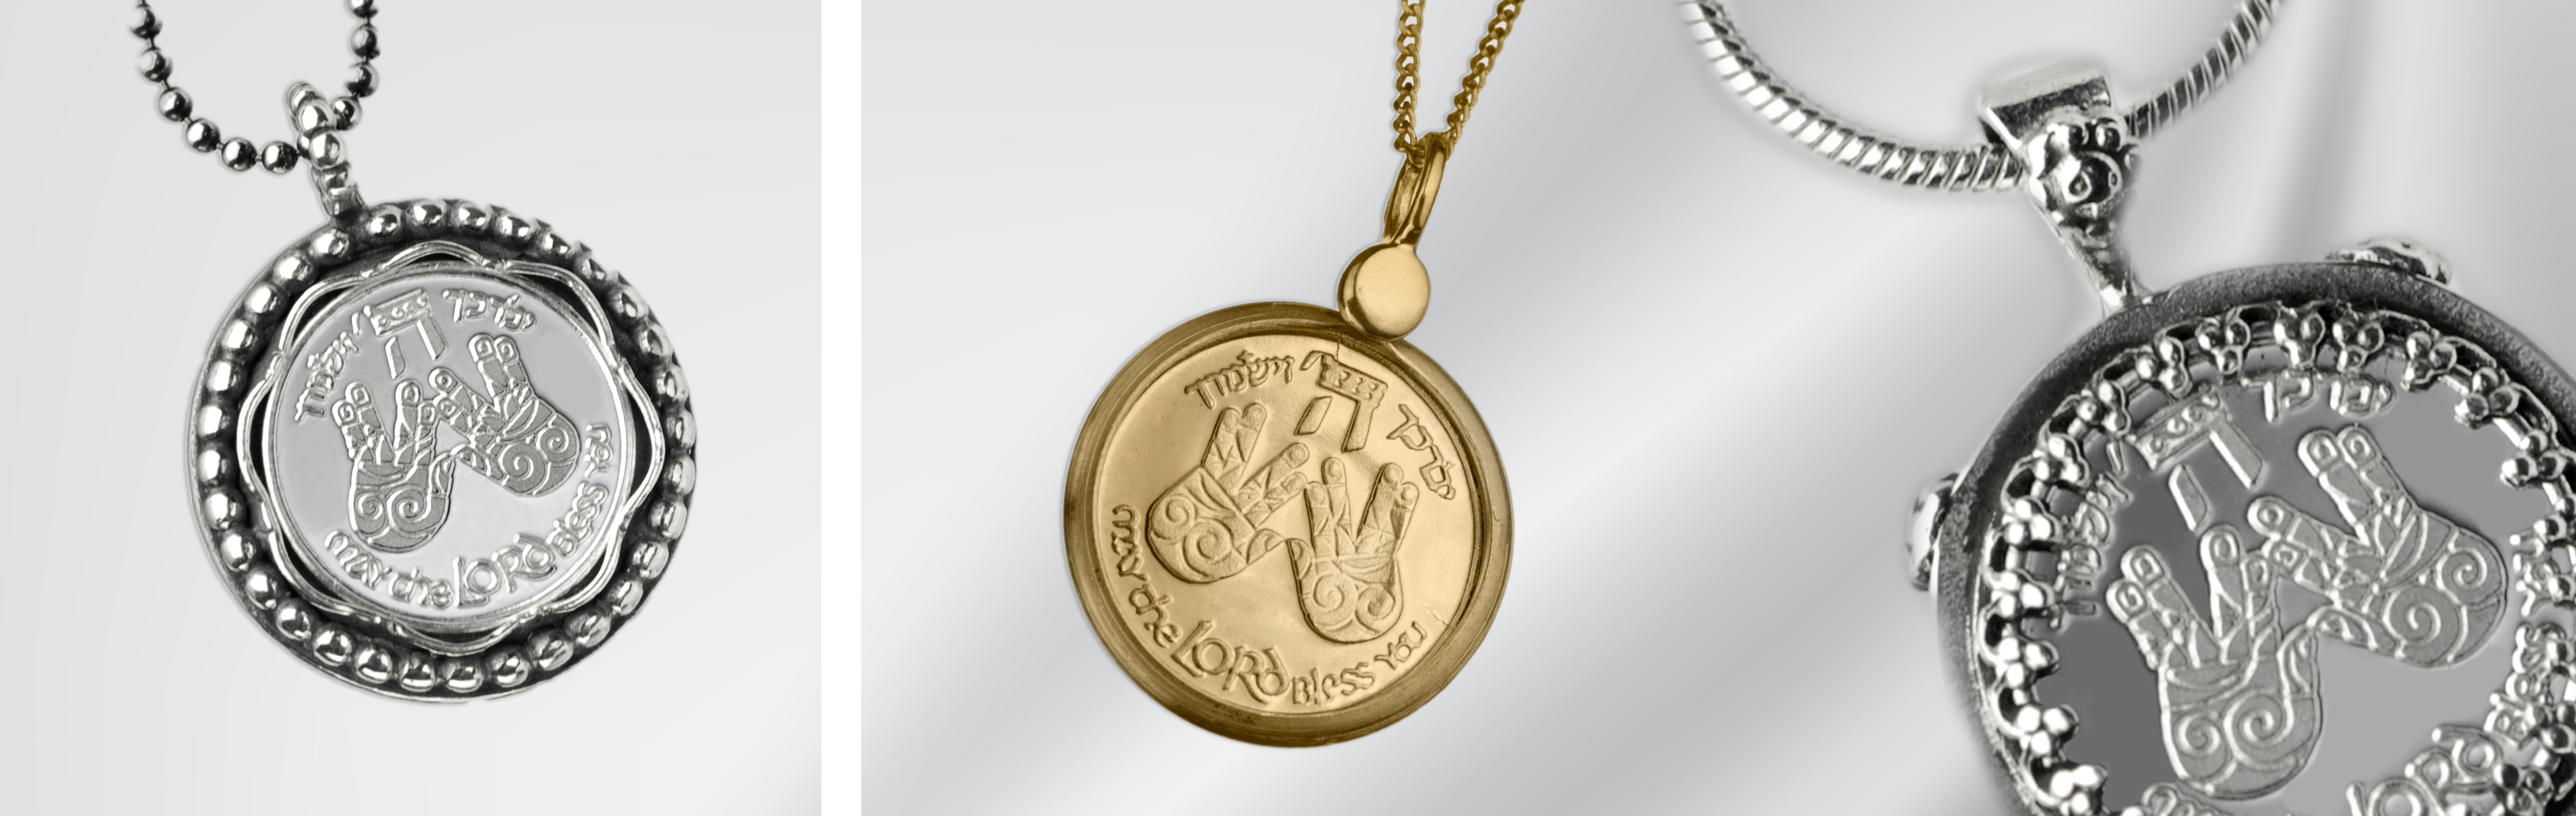 Priestly Blessing Adillion | State Medal set in 14K Gold and Silver Jewelry